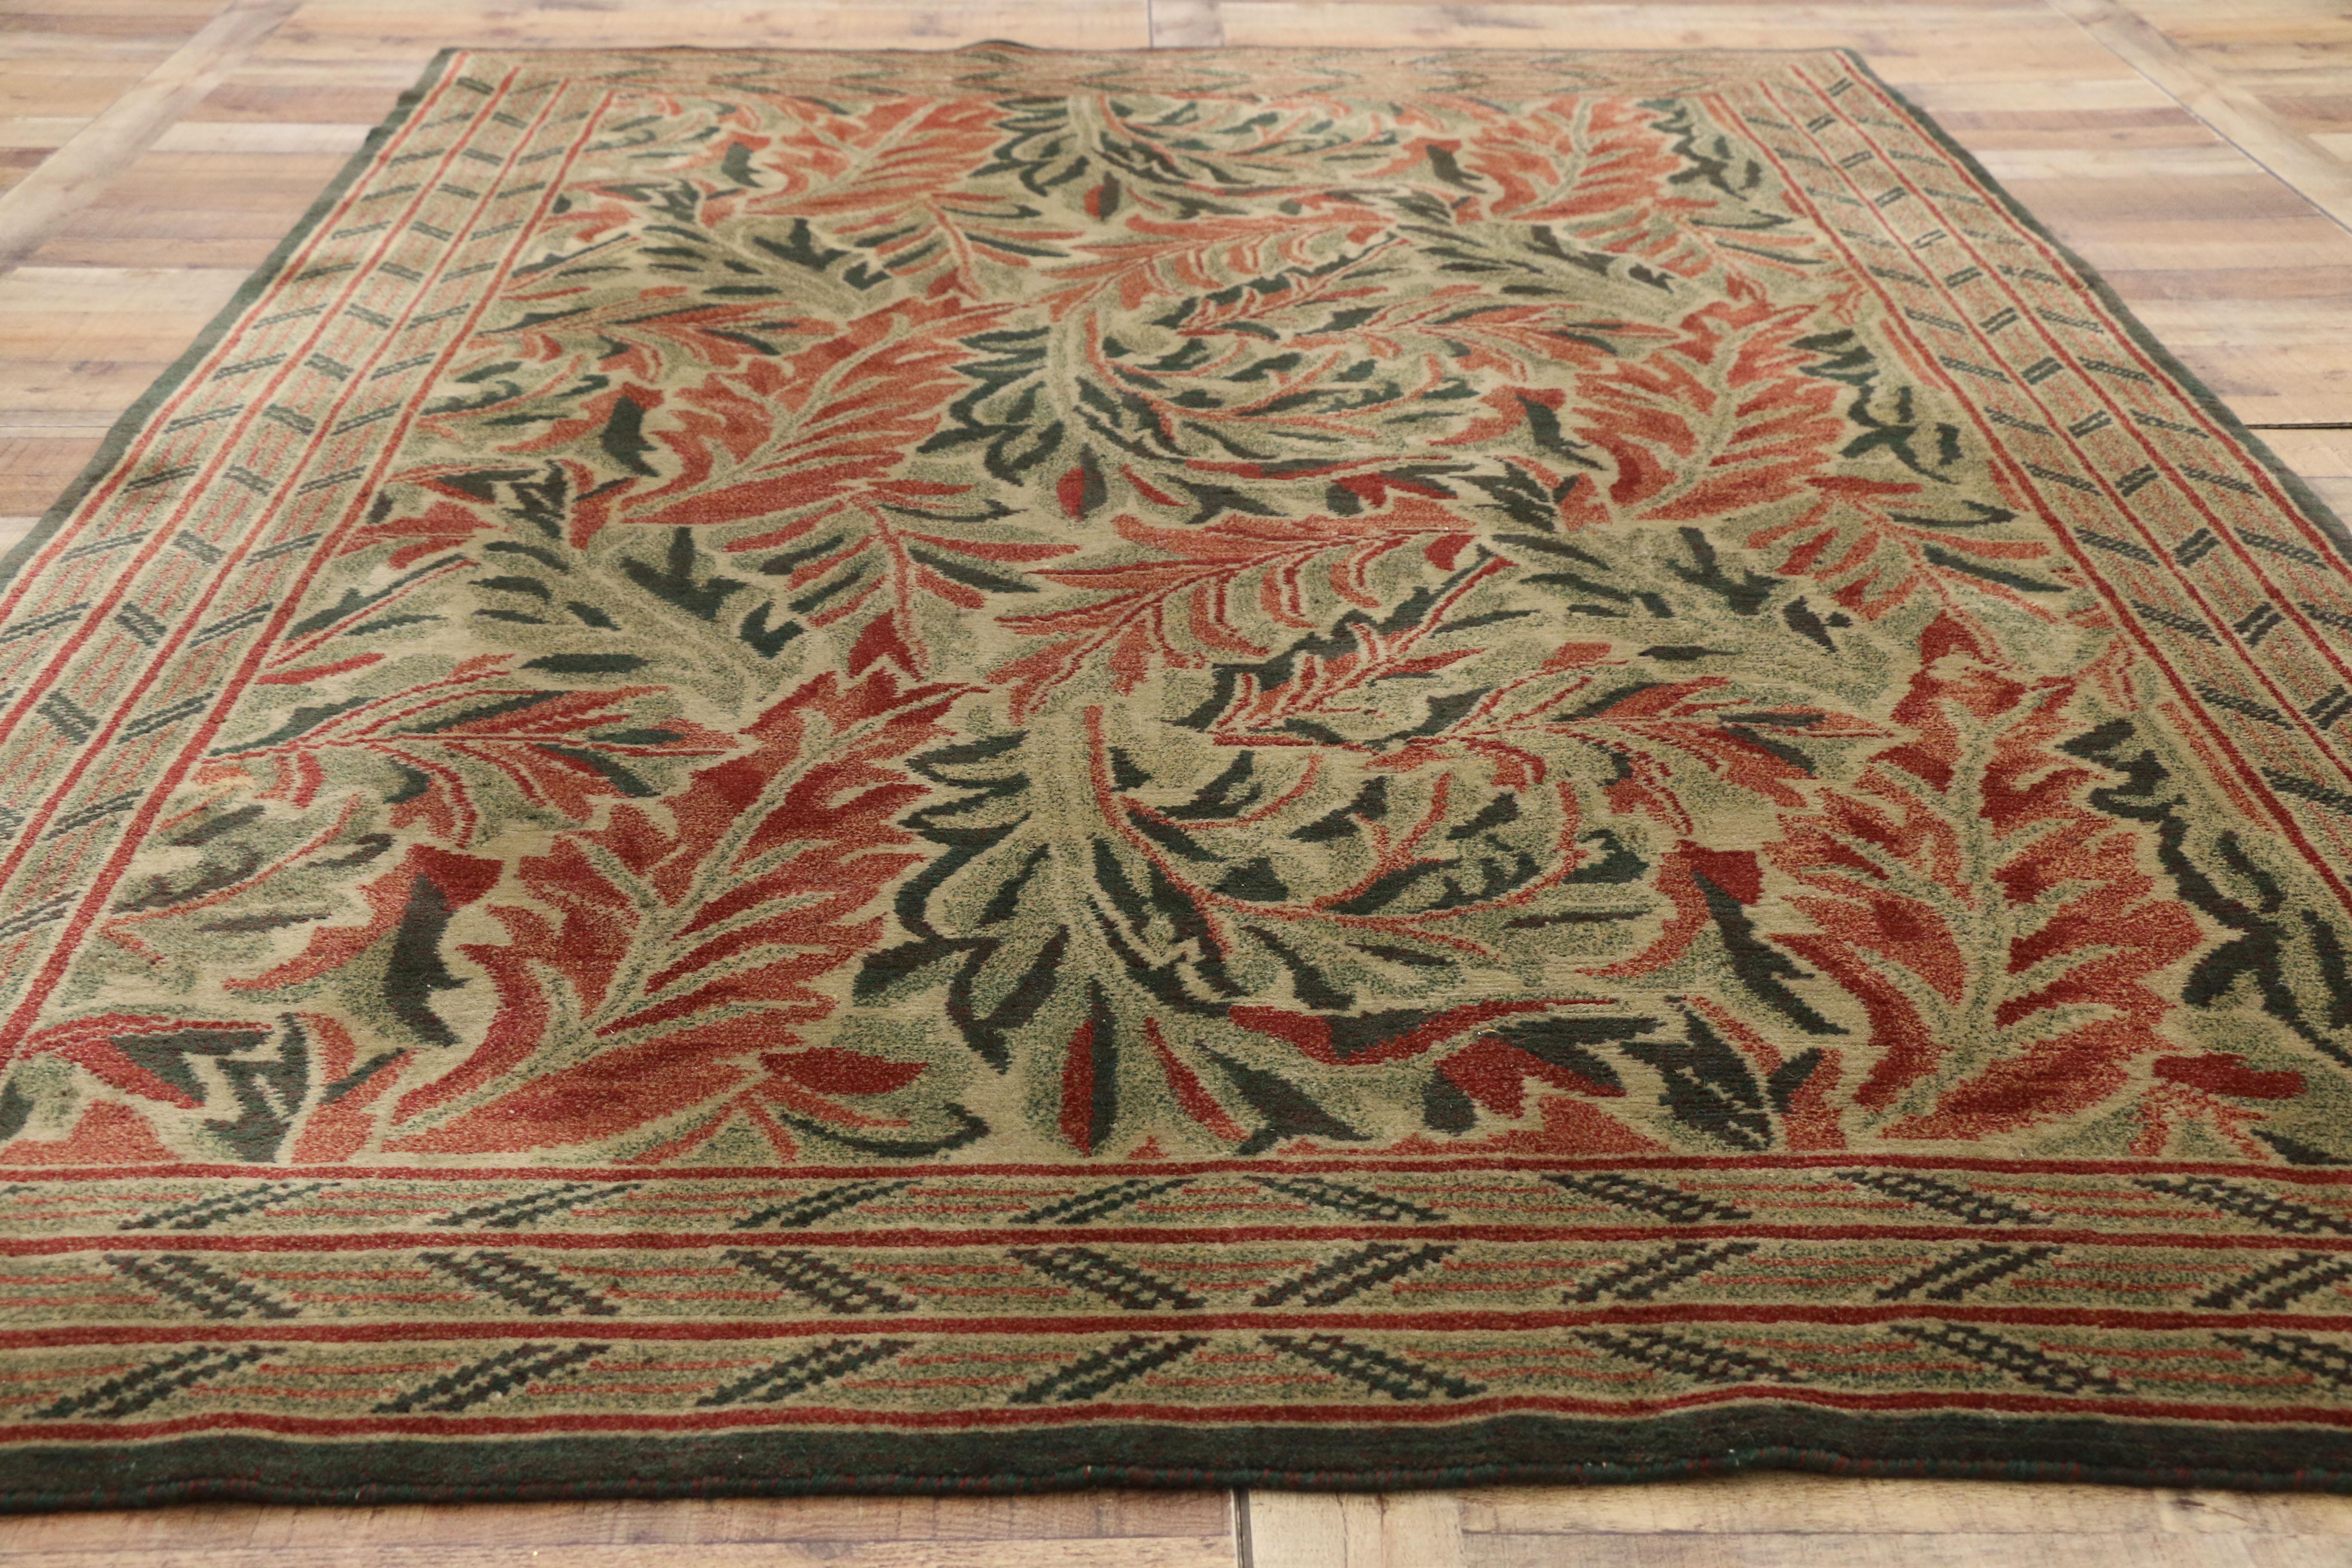 Wool Vintage Swedish William Morris Acanthus Inspired Rug with Arts & Crafts Style